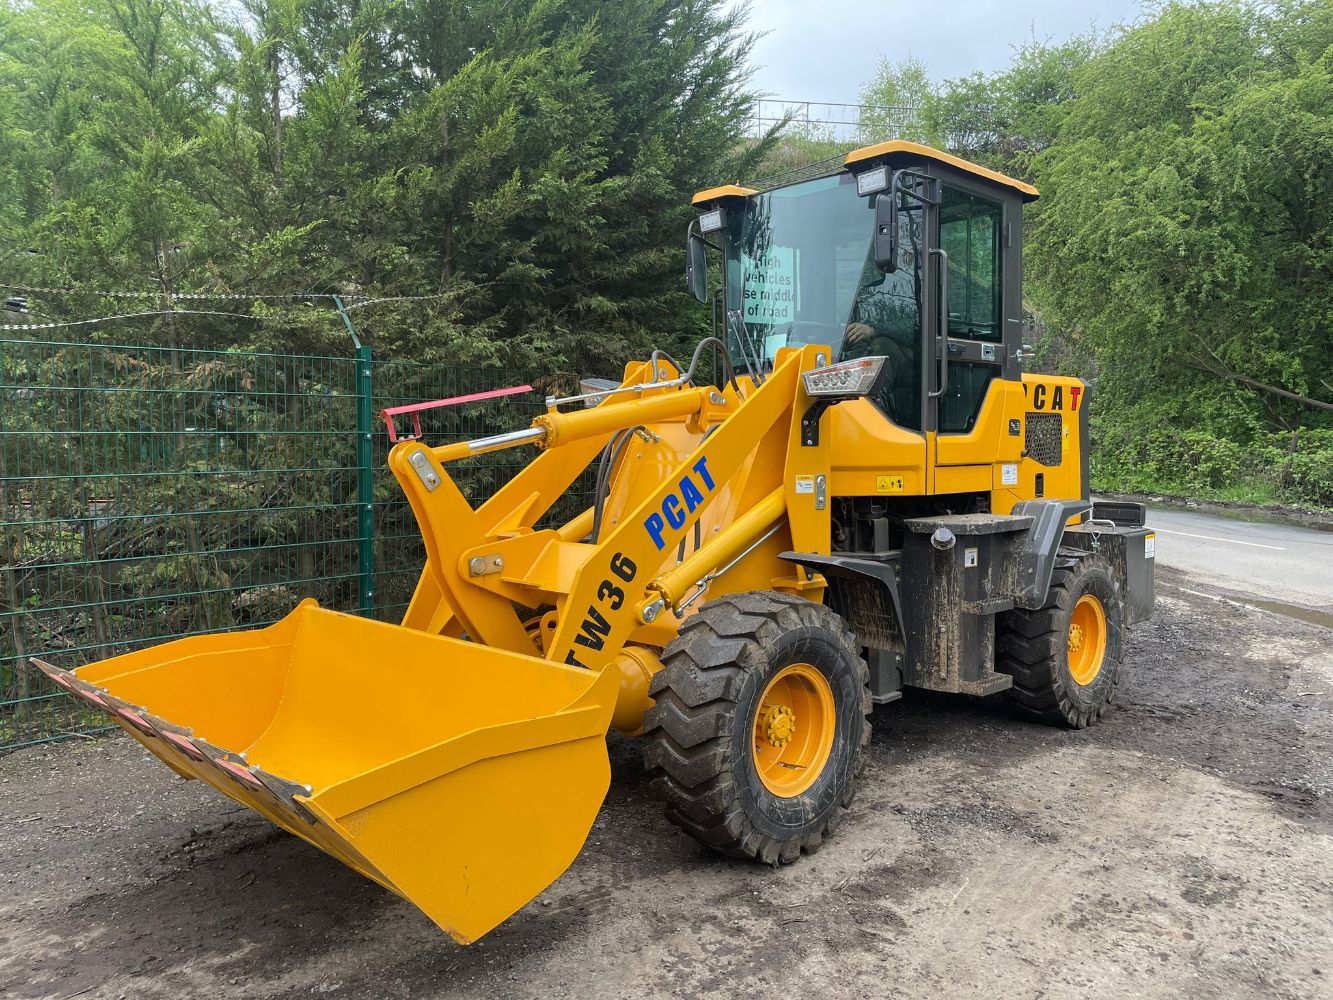 THURSDAY EVENING SALE! ENDS FROM 7PM INCLUDES TARMAC PLANER, 14TON EXCAVATOR, SCARAB SWEEPER, LAND ROVER, DUMPERS, DIGGER, FORKLIFTS & MUCH MORE